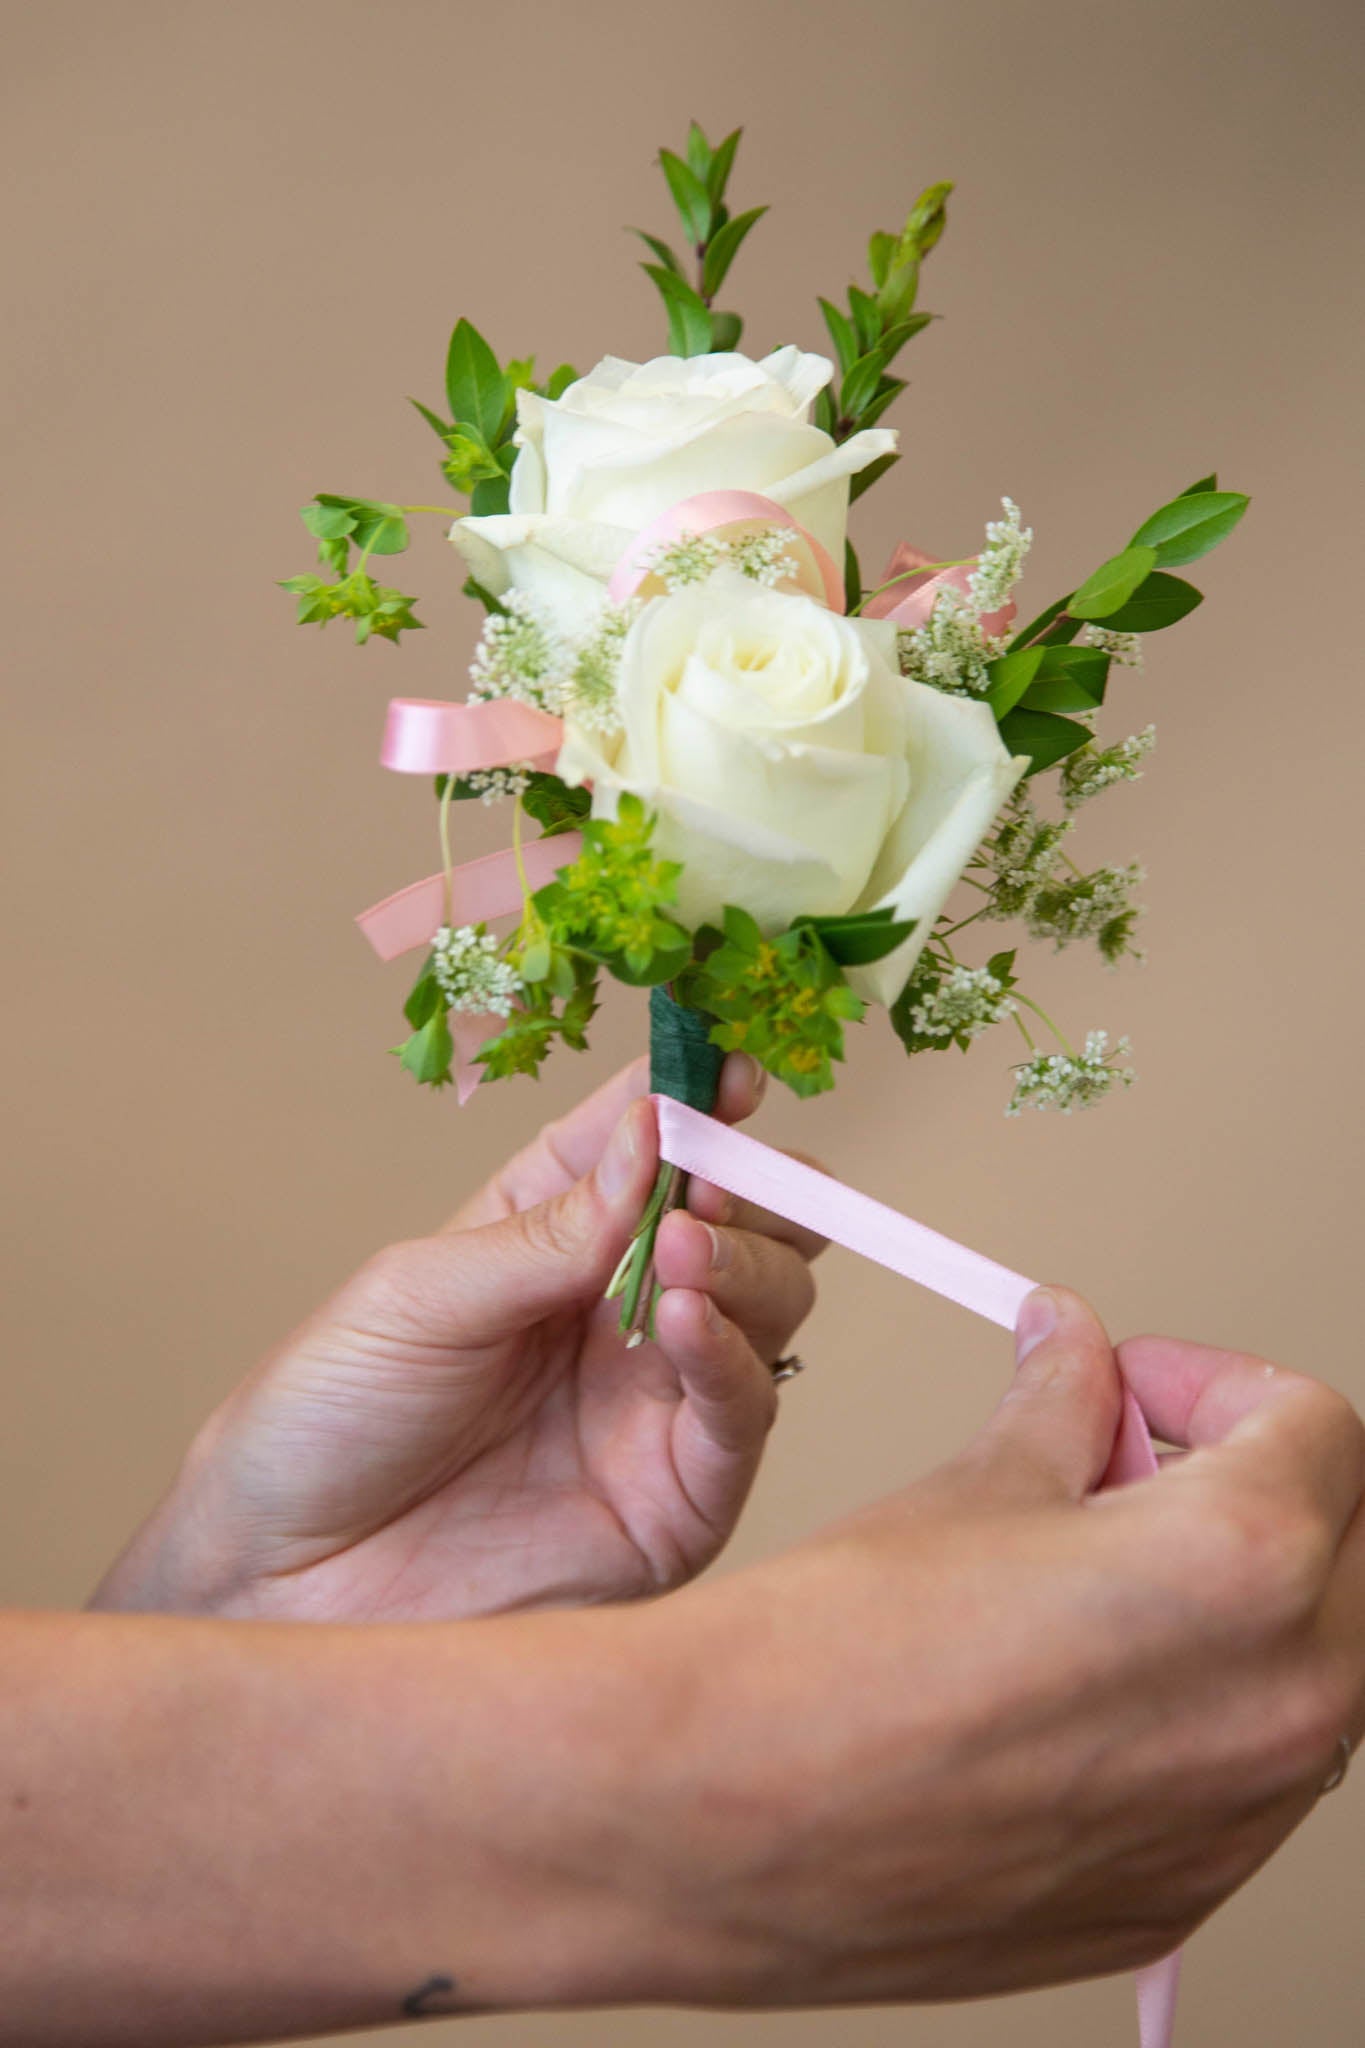 How to Make a DIY Wrist Corsage for the Mother of the Bride